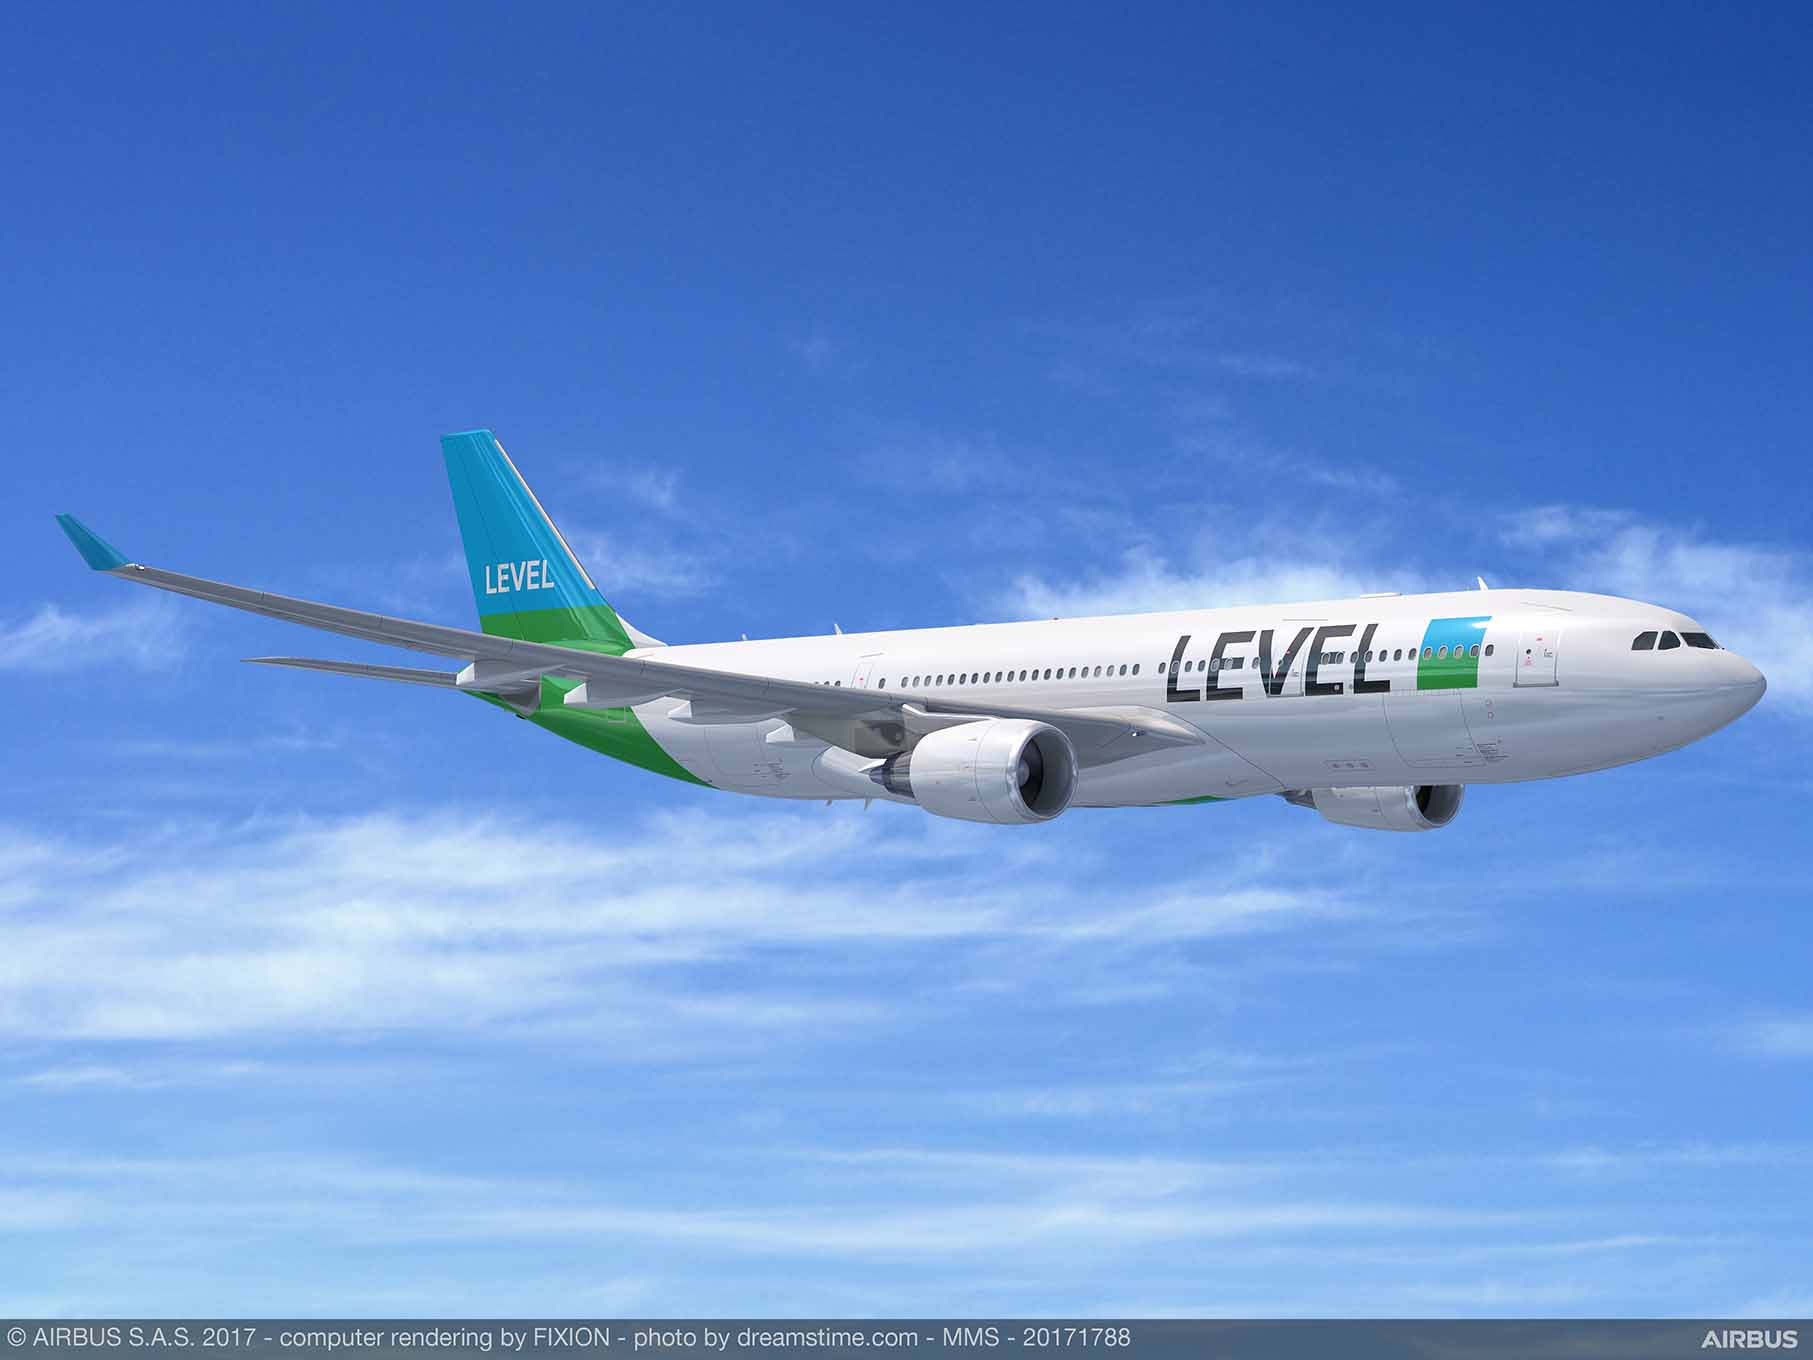 LEVEL adds two A330-200 to its fleet